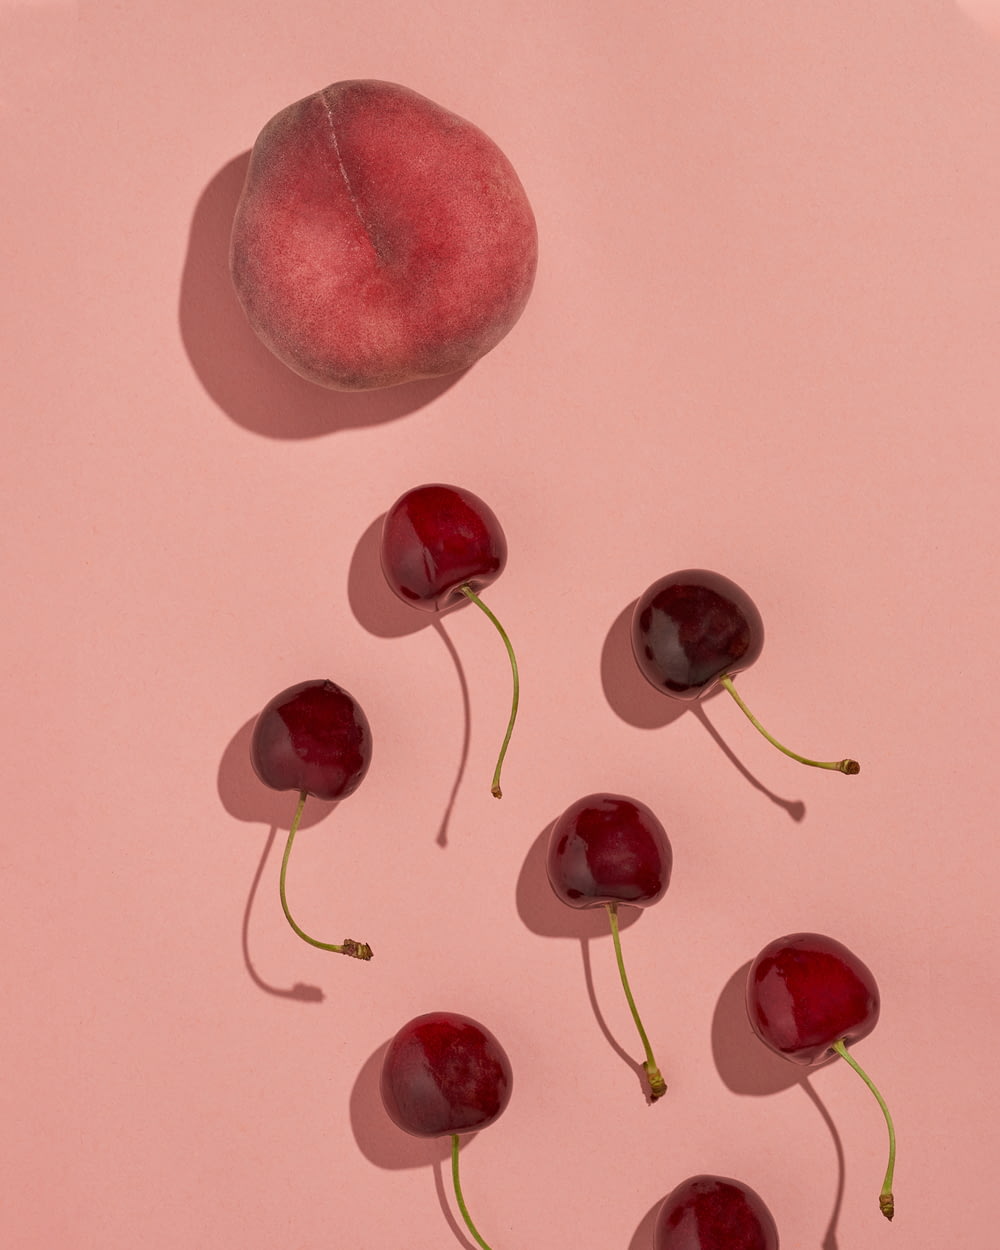 a group of cherries sitting on top of a pink surface